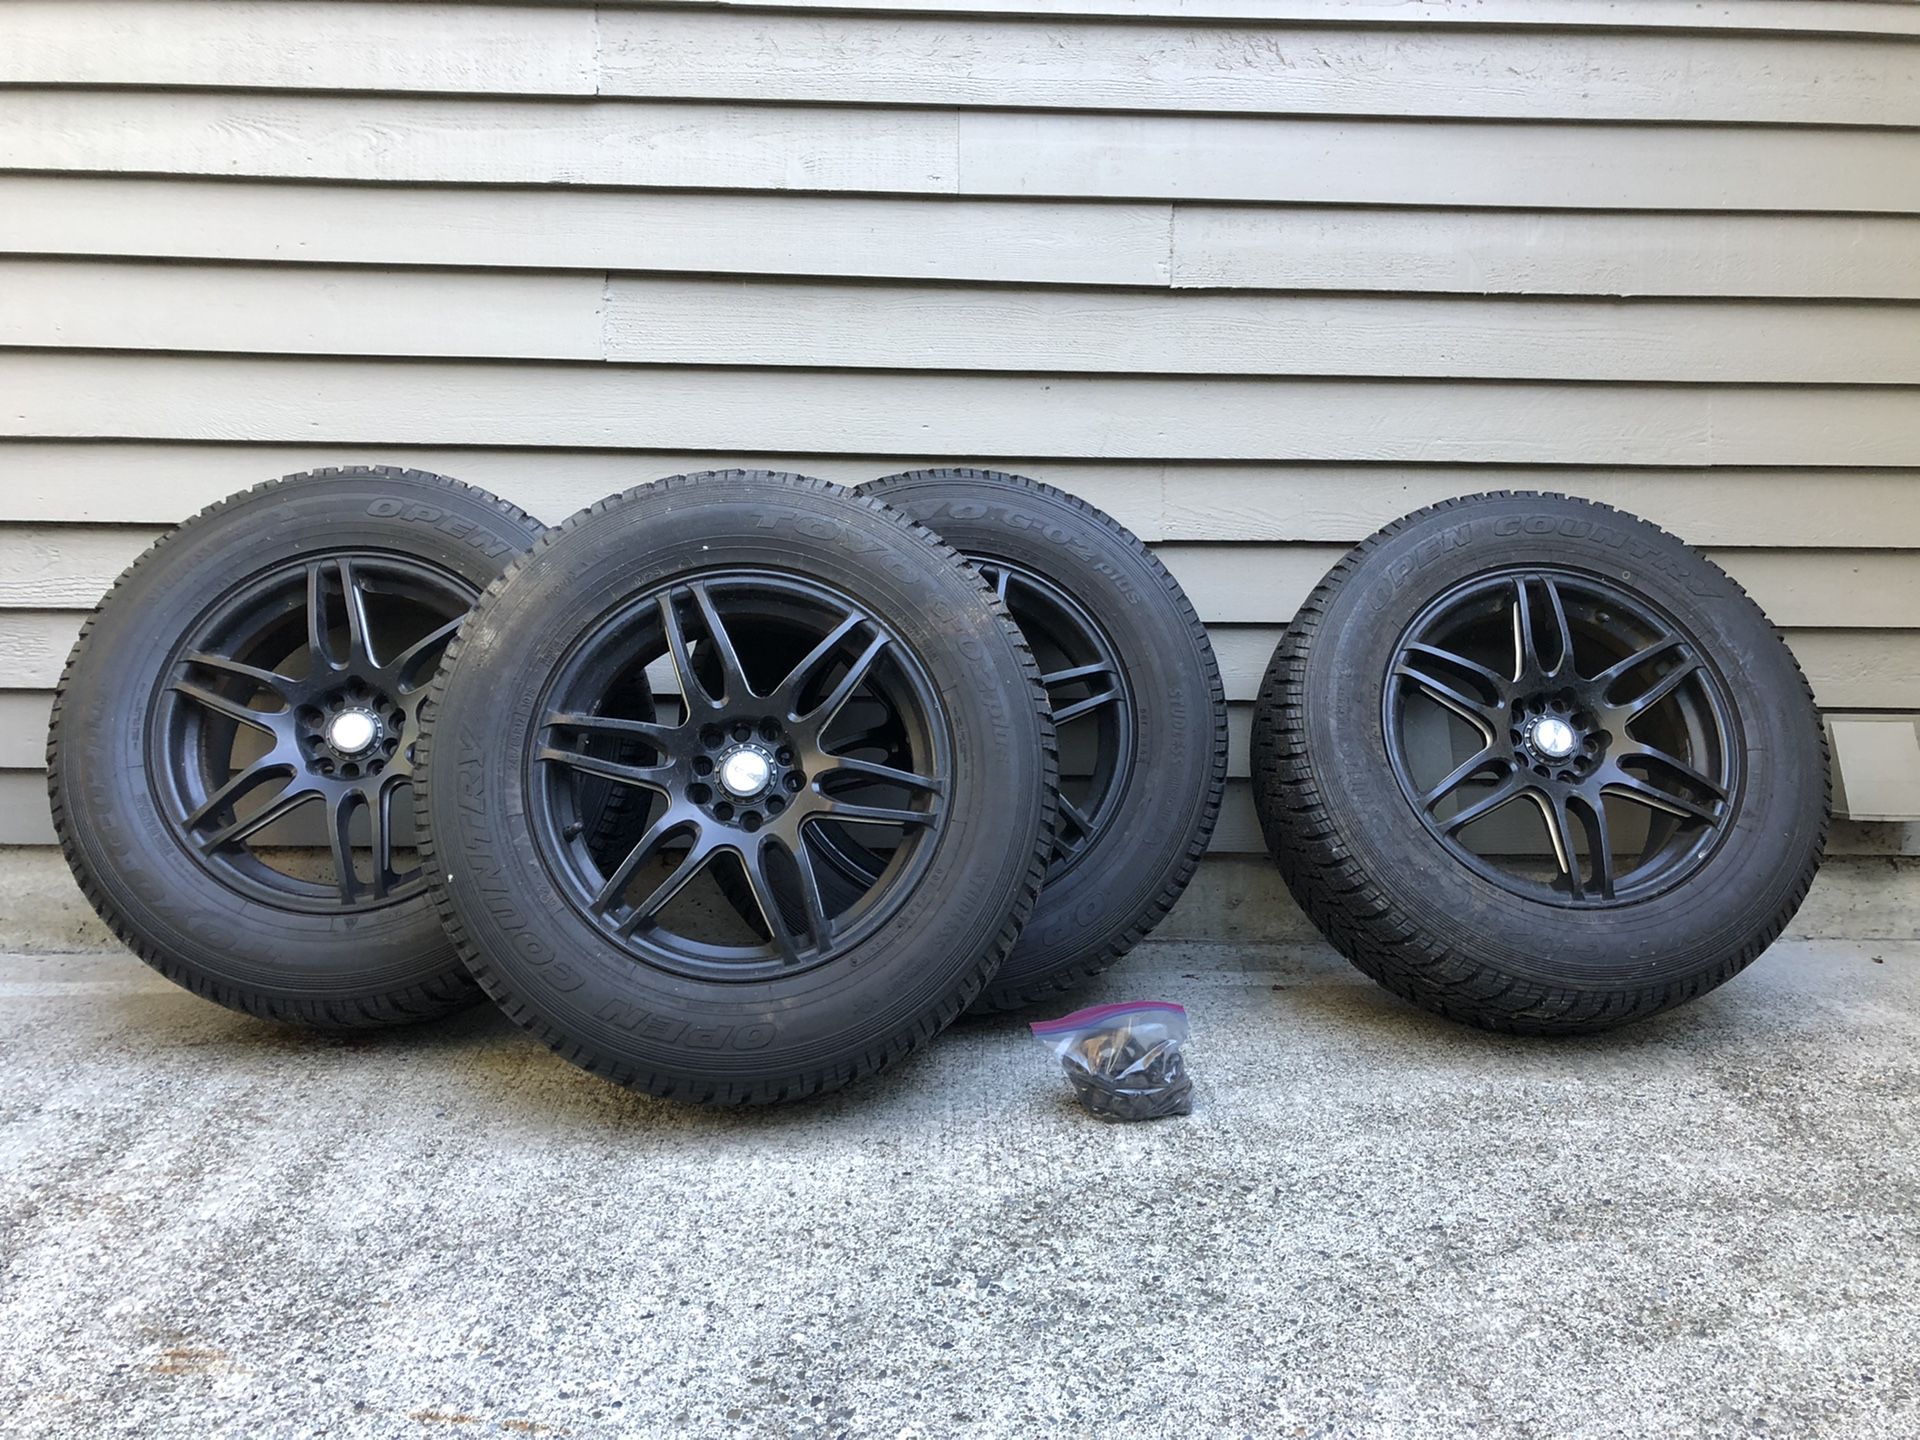 Set of 4 - Rims and Studless Snow Tires (Toyo Open Country)